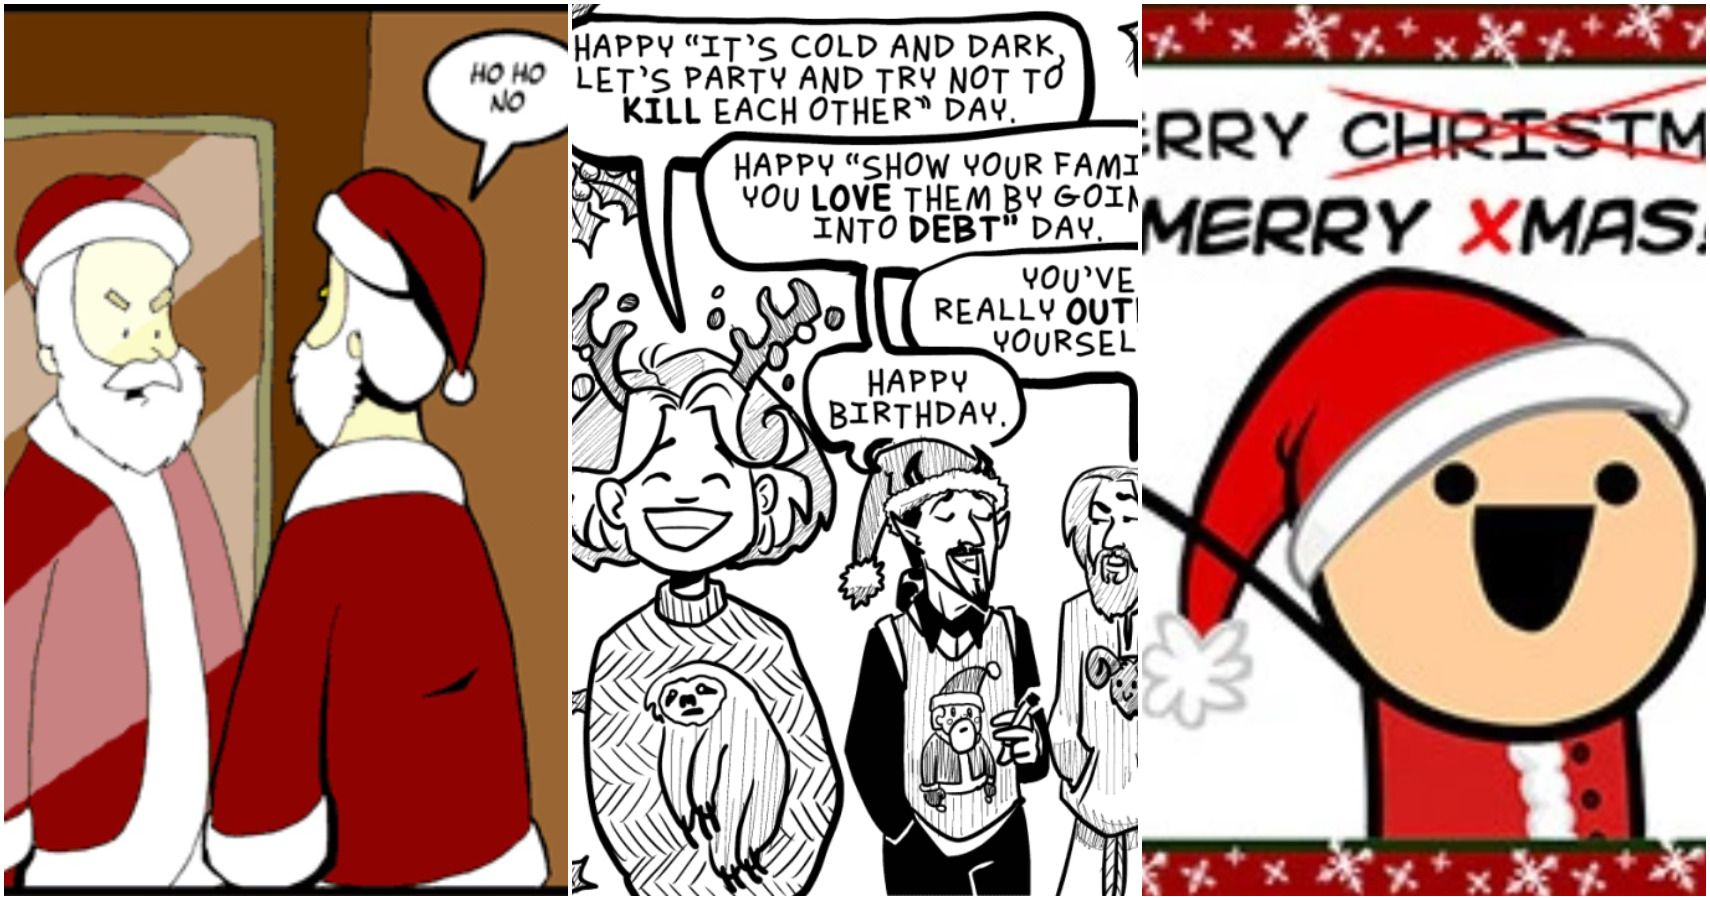 Christmas Webcomics. Cyanide and Happiness. Devil's Panties. Something Positive.